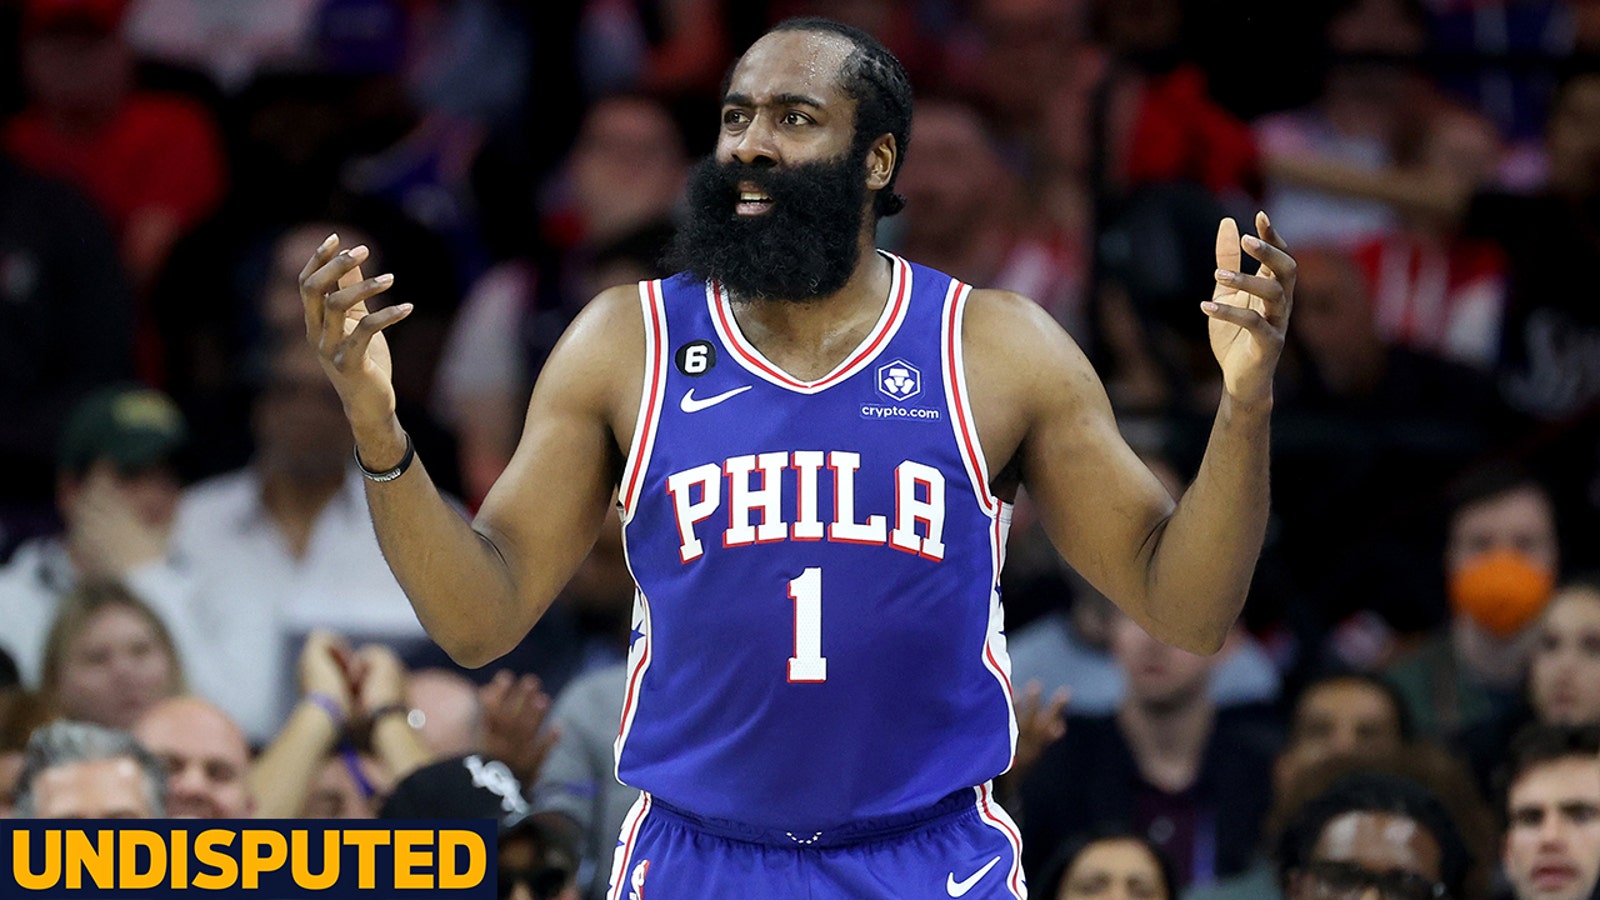 James Harden wants trade from 76ers, calls GM Daryl Morey "a liar"